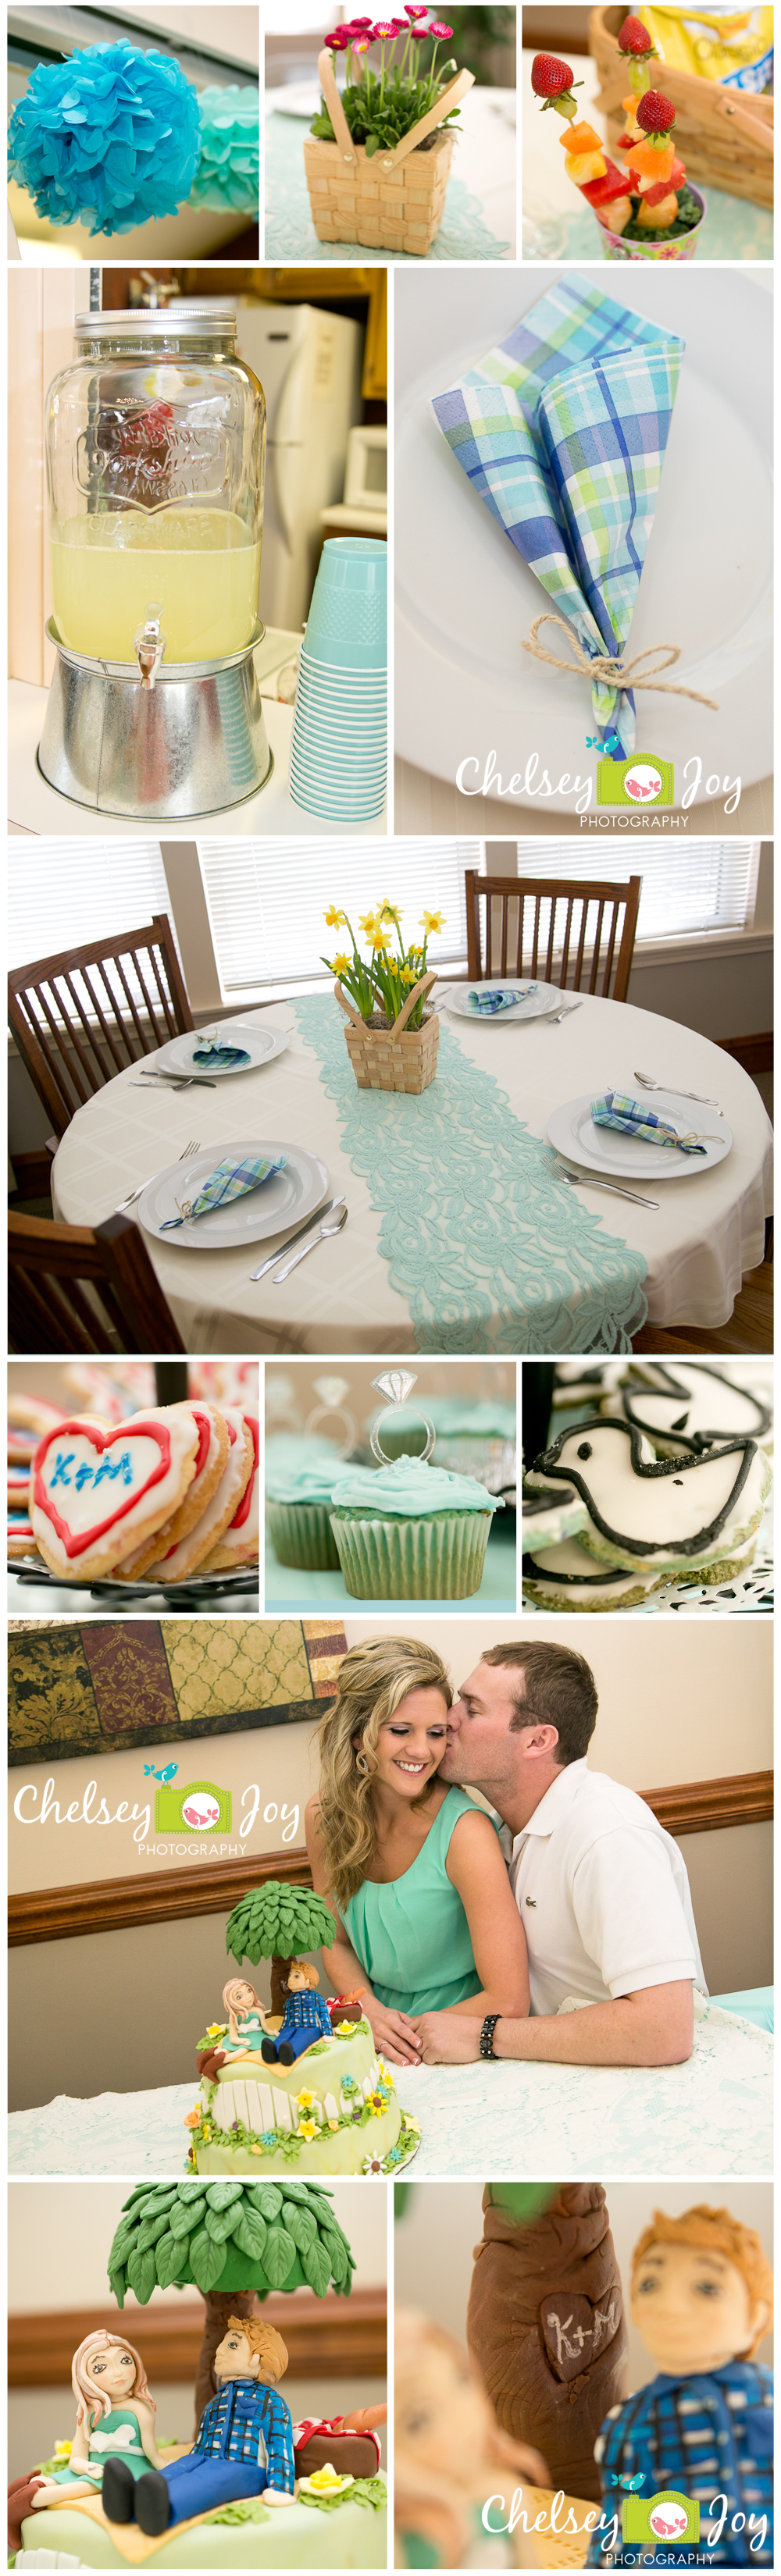 Country Chic Bridal Shower Ideas